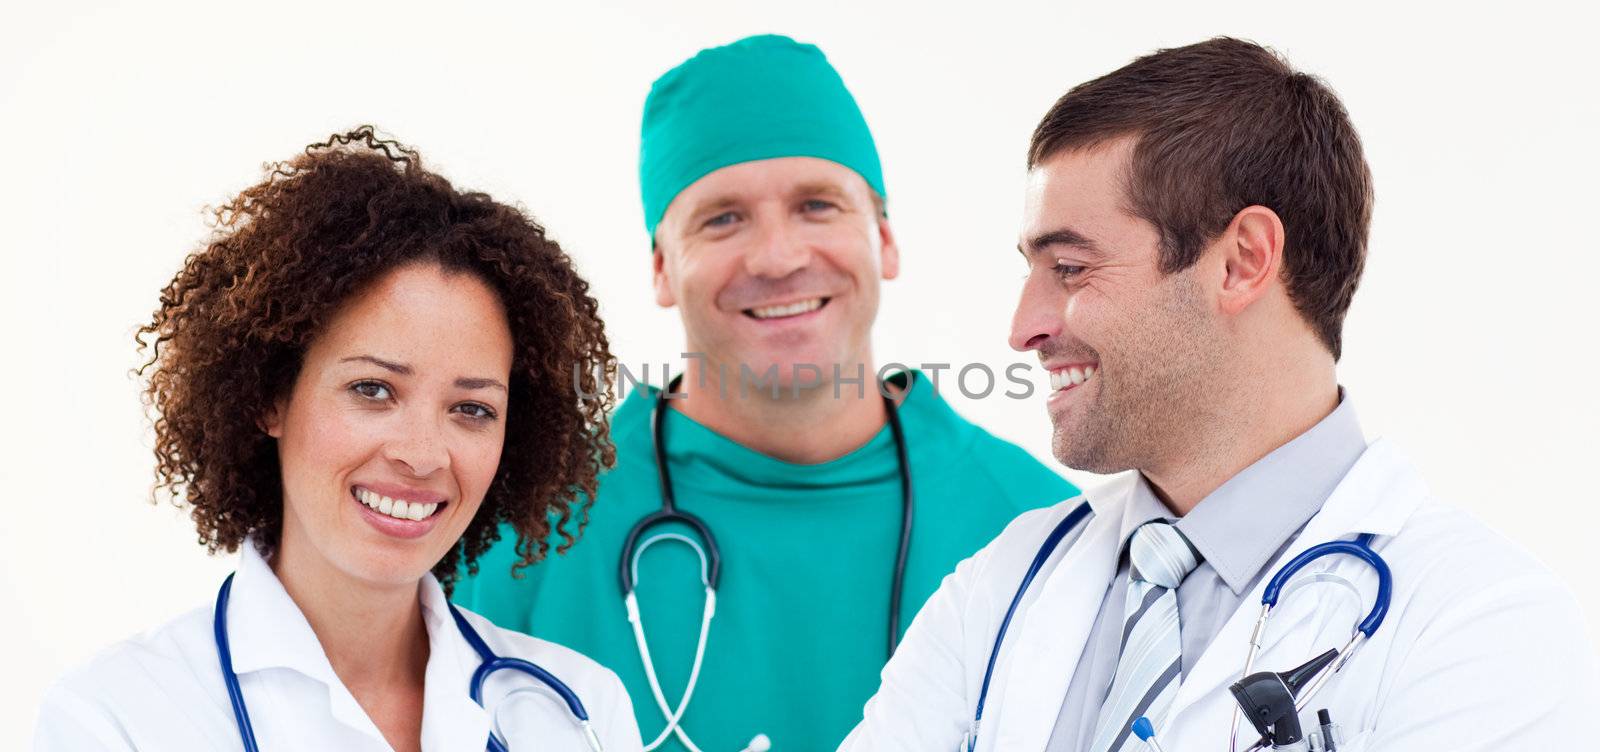 Group of smiling doctors looking at the camera by Wavebreakmedia